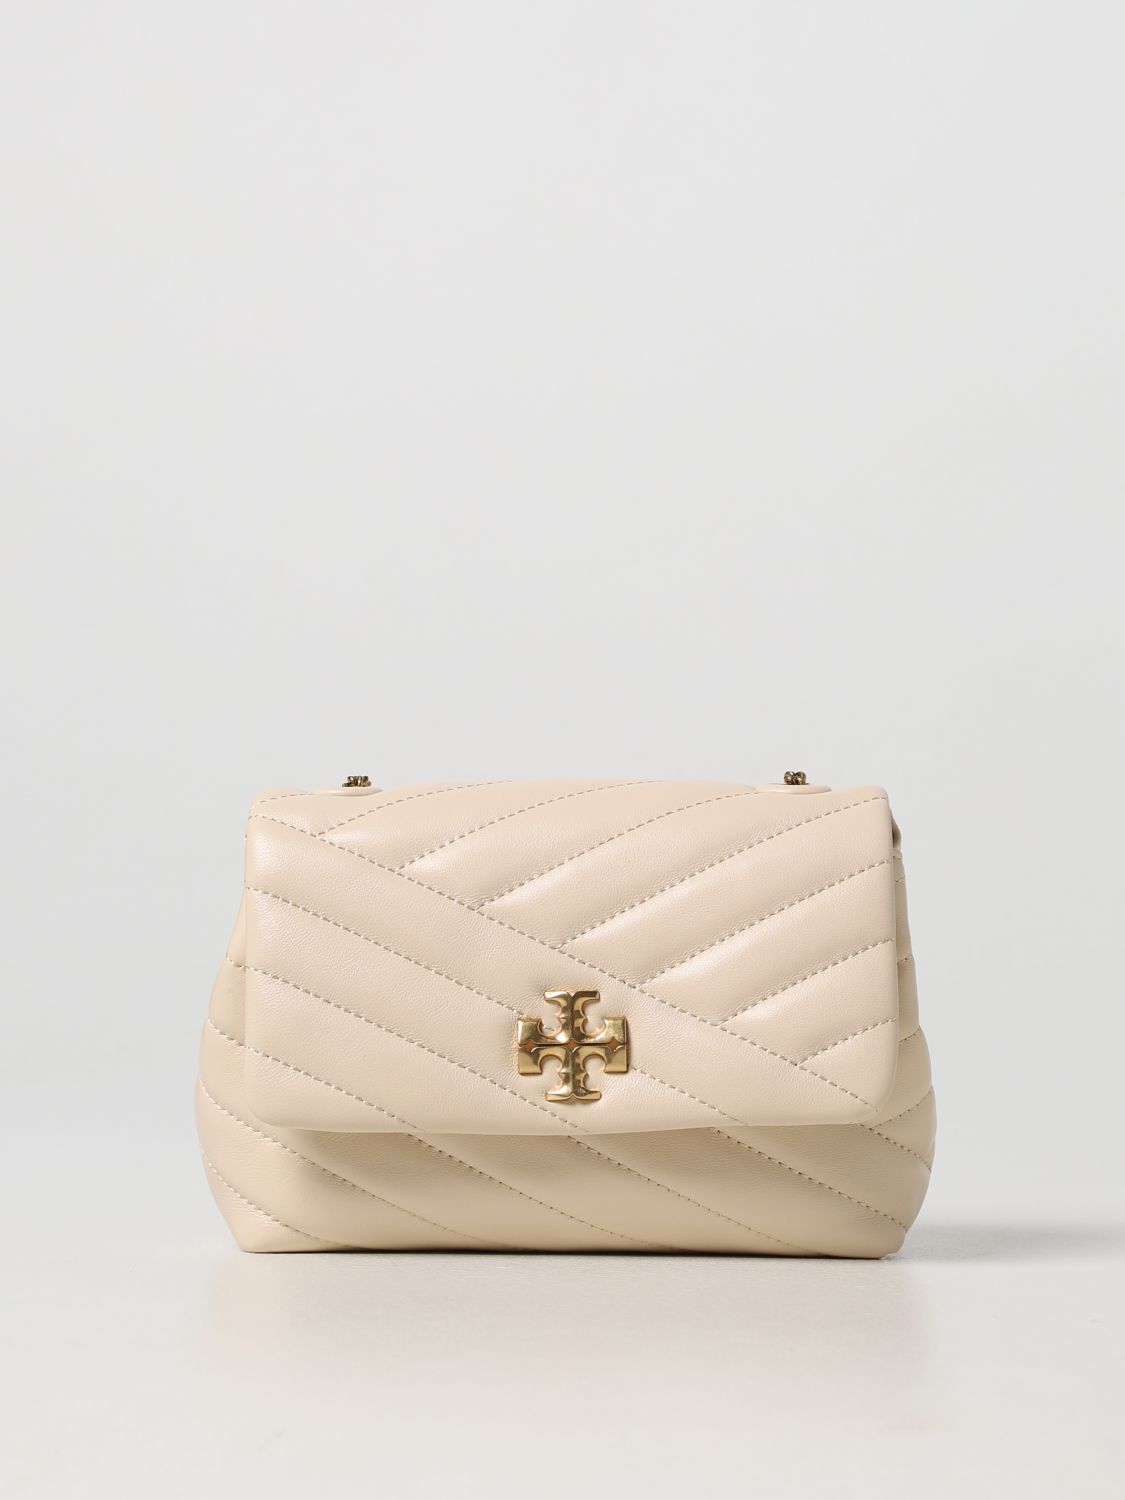 Tory Burch - Kira Small Quilted Leather Shoulder Bag - Womens - Cream